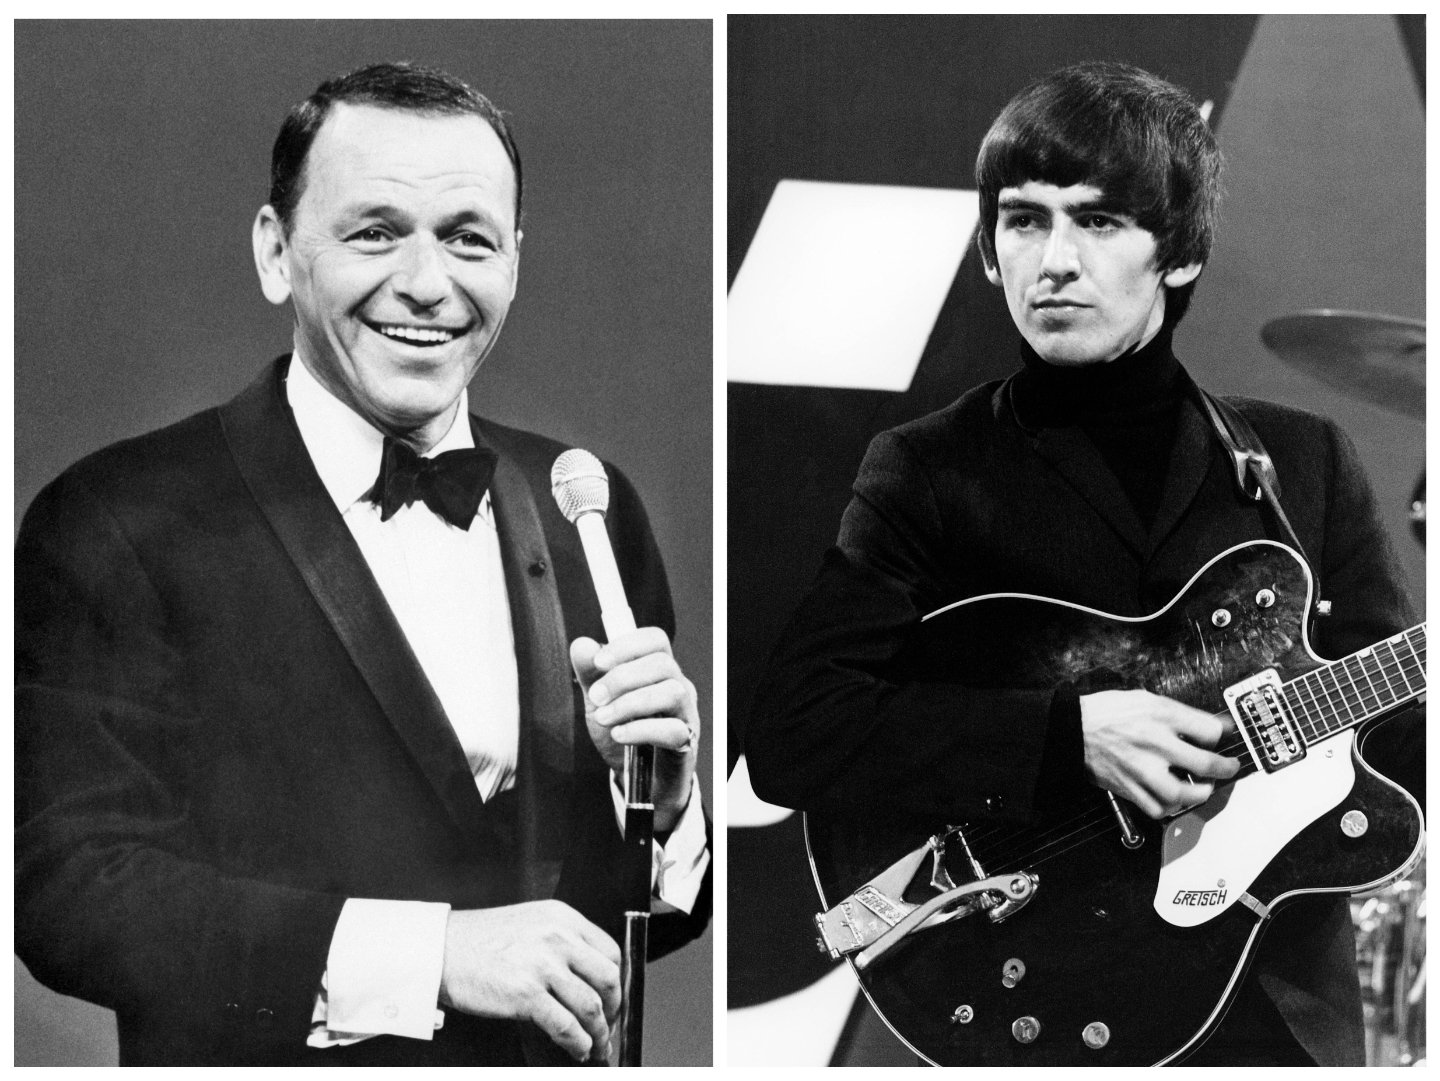 A black and white photo of Frank Sinatra wearing a tuxedo and holding a microphone. George Harrison wears a turtleneck and plays guitar.